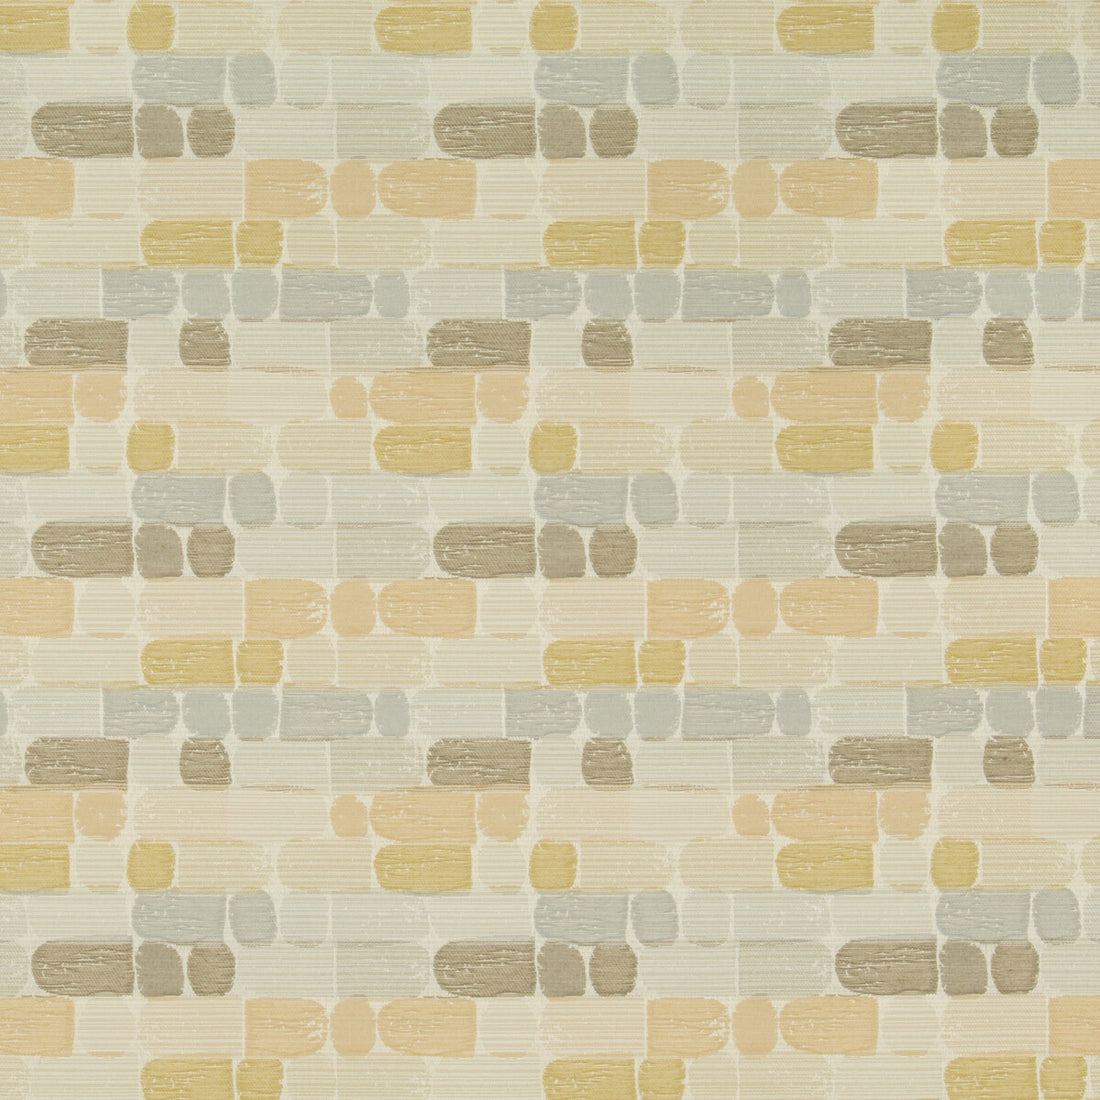 Fingerpaint fabric in lotus color - pattern 35088.16.0 - by Kravet Contract in the Gis Crypton collection